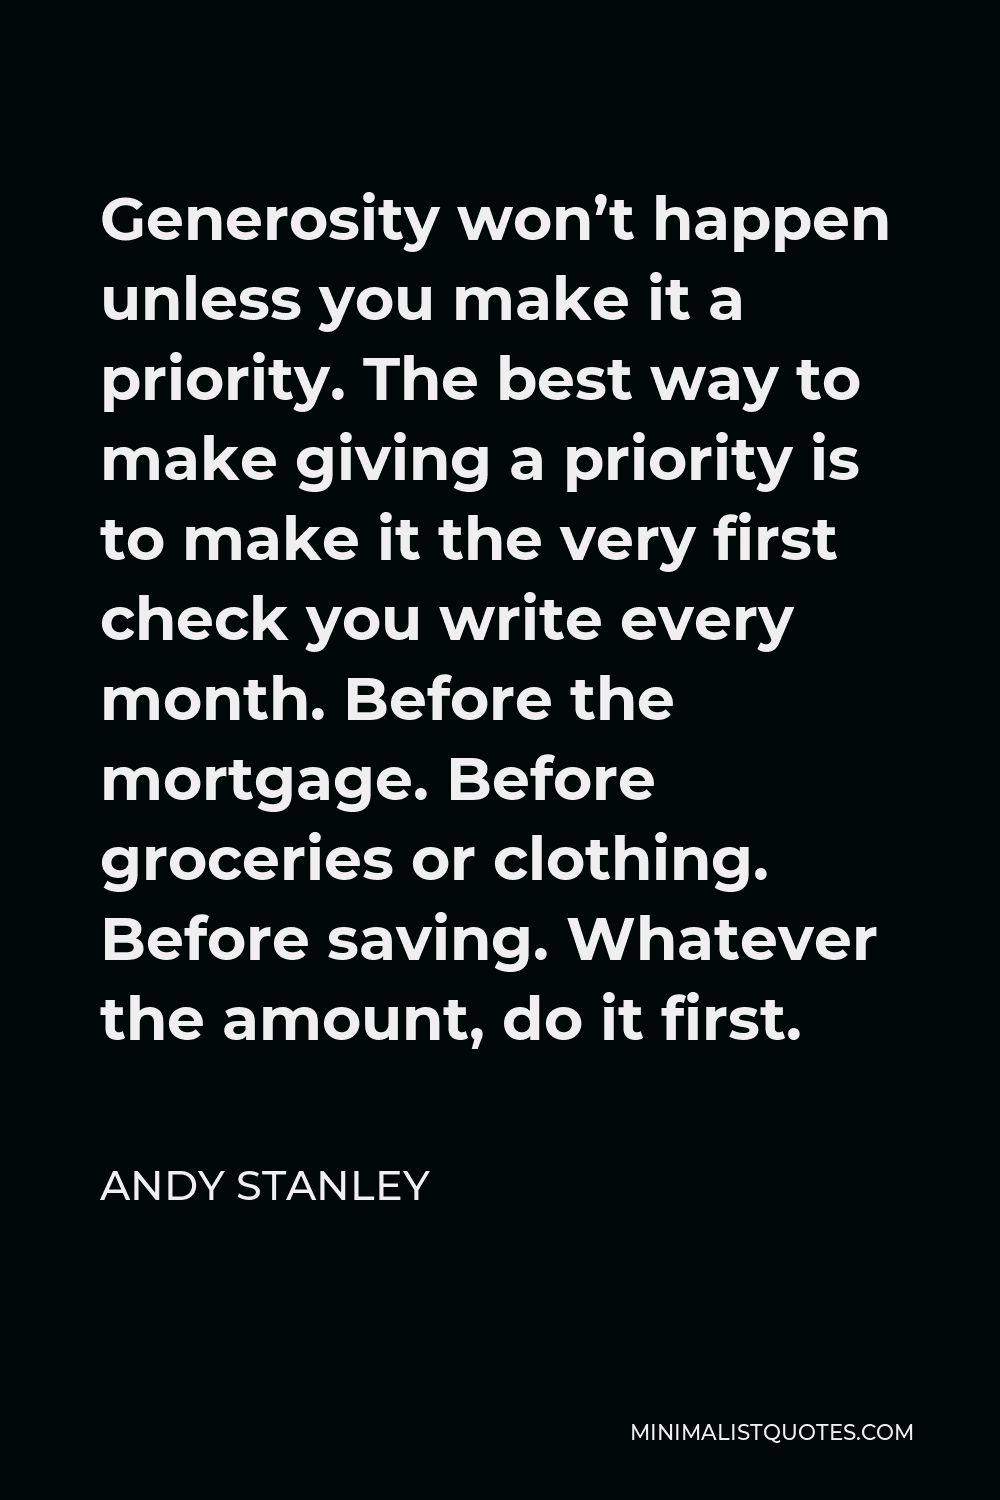 Andy Stanley Quote - Generosity won’t happen unless you make it a priority. The best way to make giving a priority is to make it the very first check you write every month. Before the mortgage. Before groceries or clothing. Before saving. Whatever the amount, do it first.